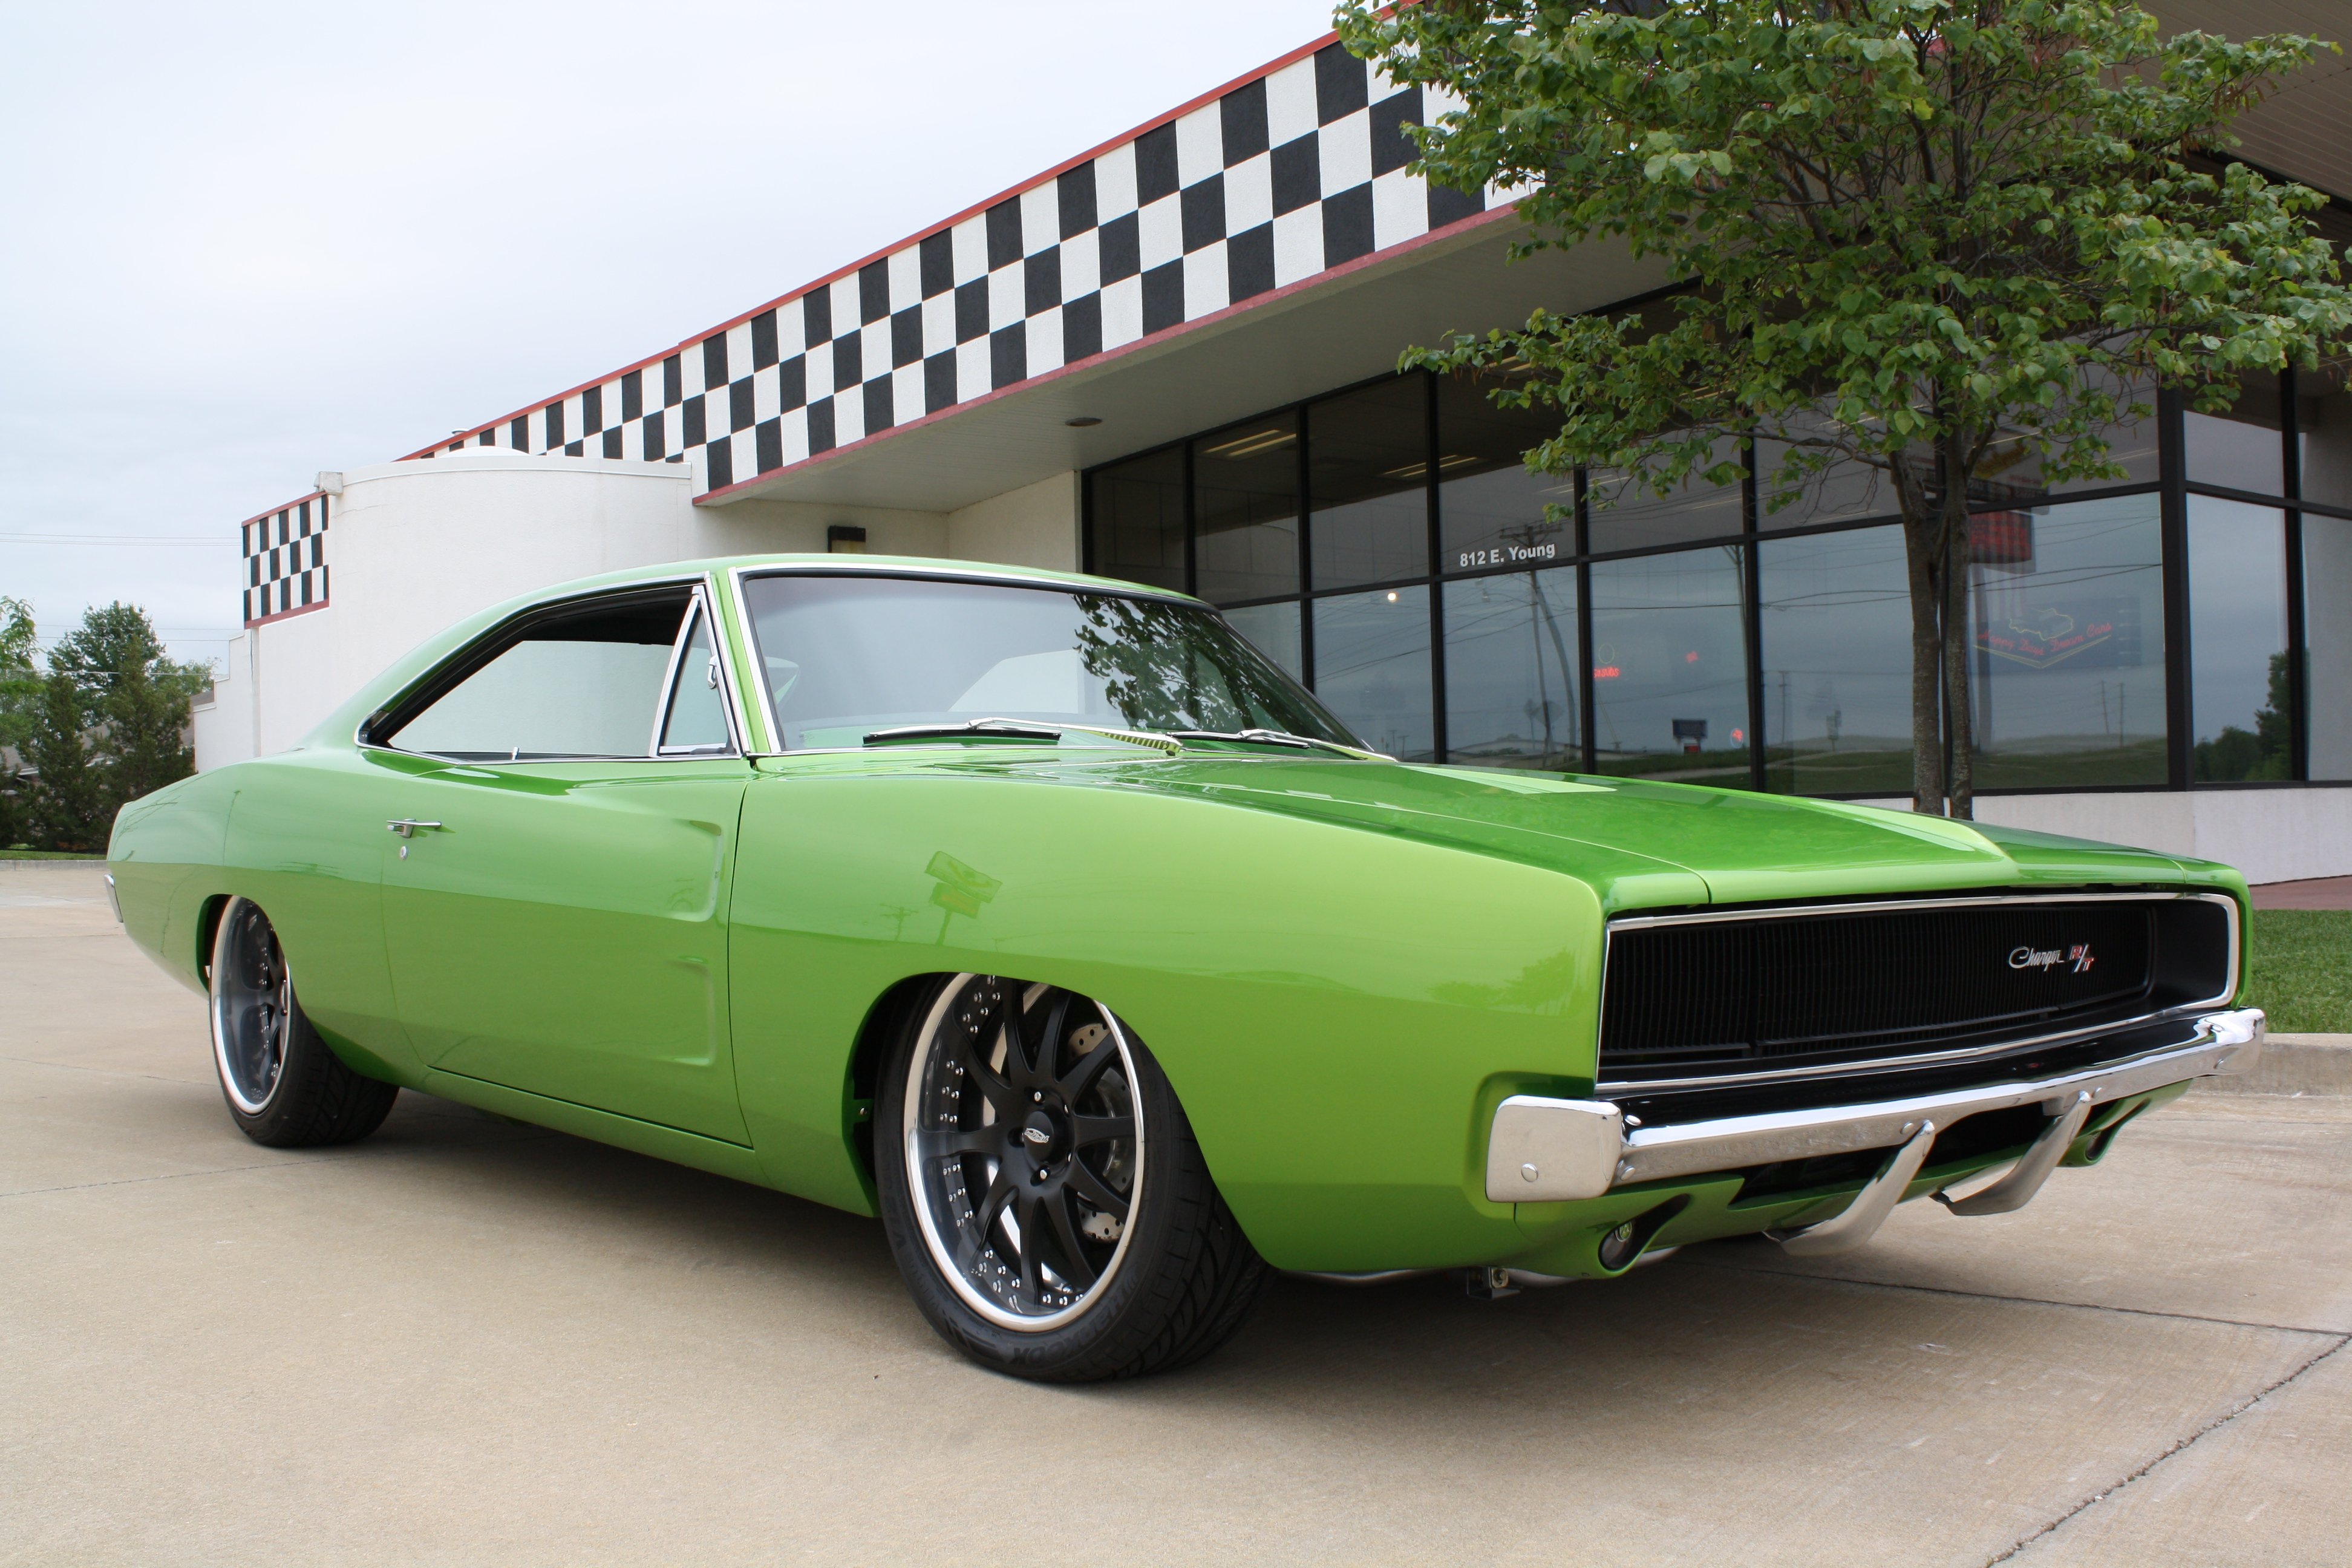 1968, Dodge, Charger, Rt, Streetrod, Street, Rod, Hot, Low, Muscle, Usa, 2888x2592 01 Wallpaper